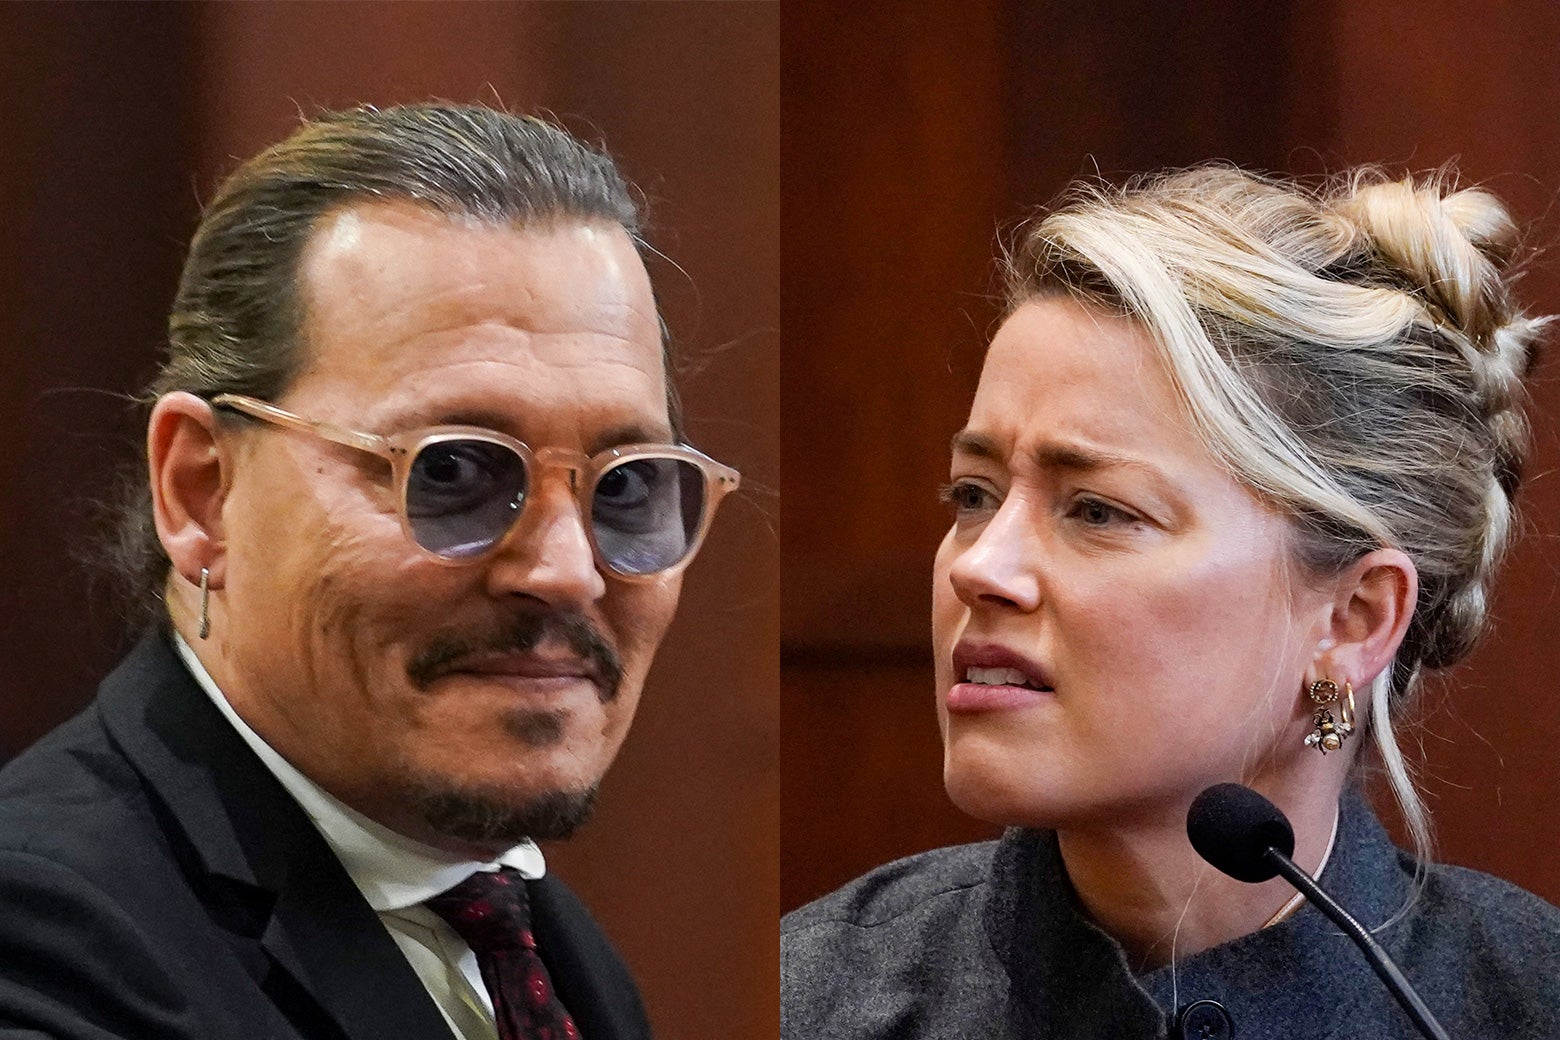 Johnny Depp Amber Heard how the trial and verdict duped America.